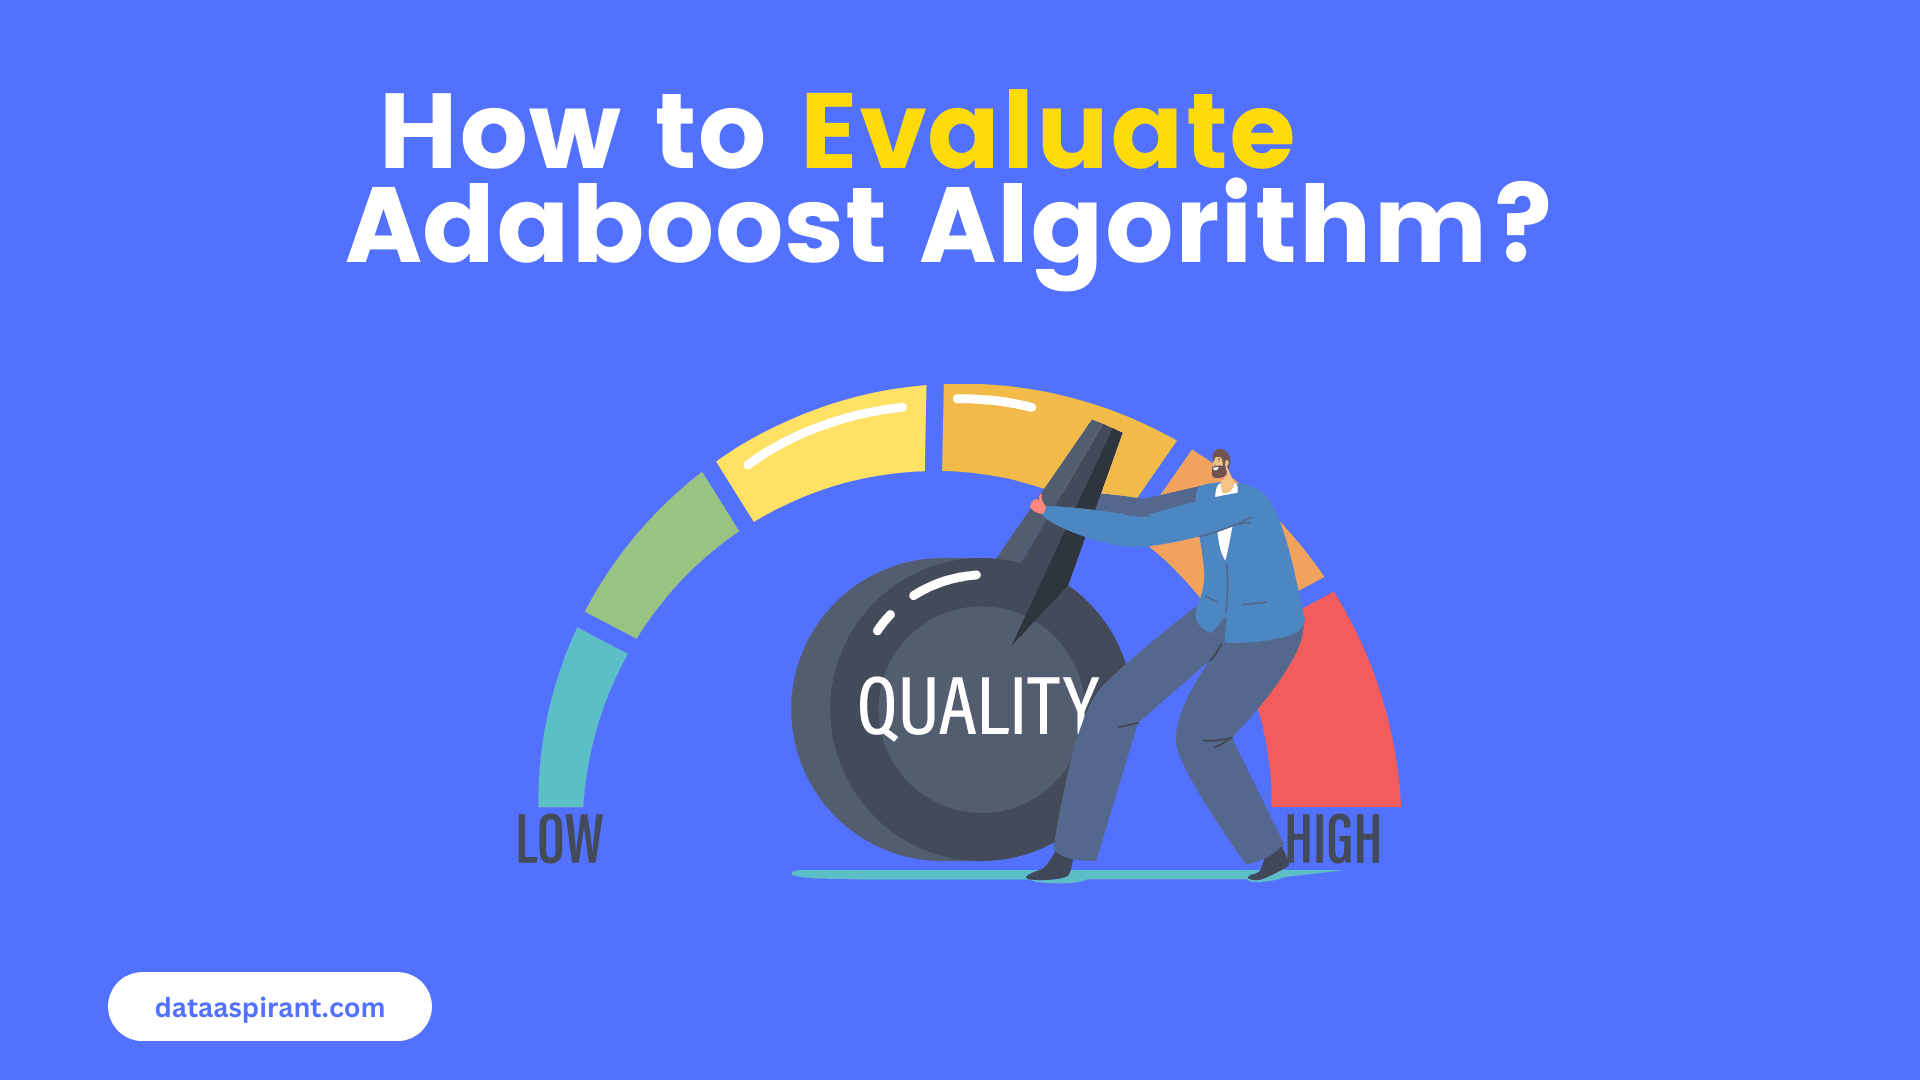 How to Evaluate Adaboost Algorithm